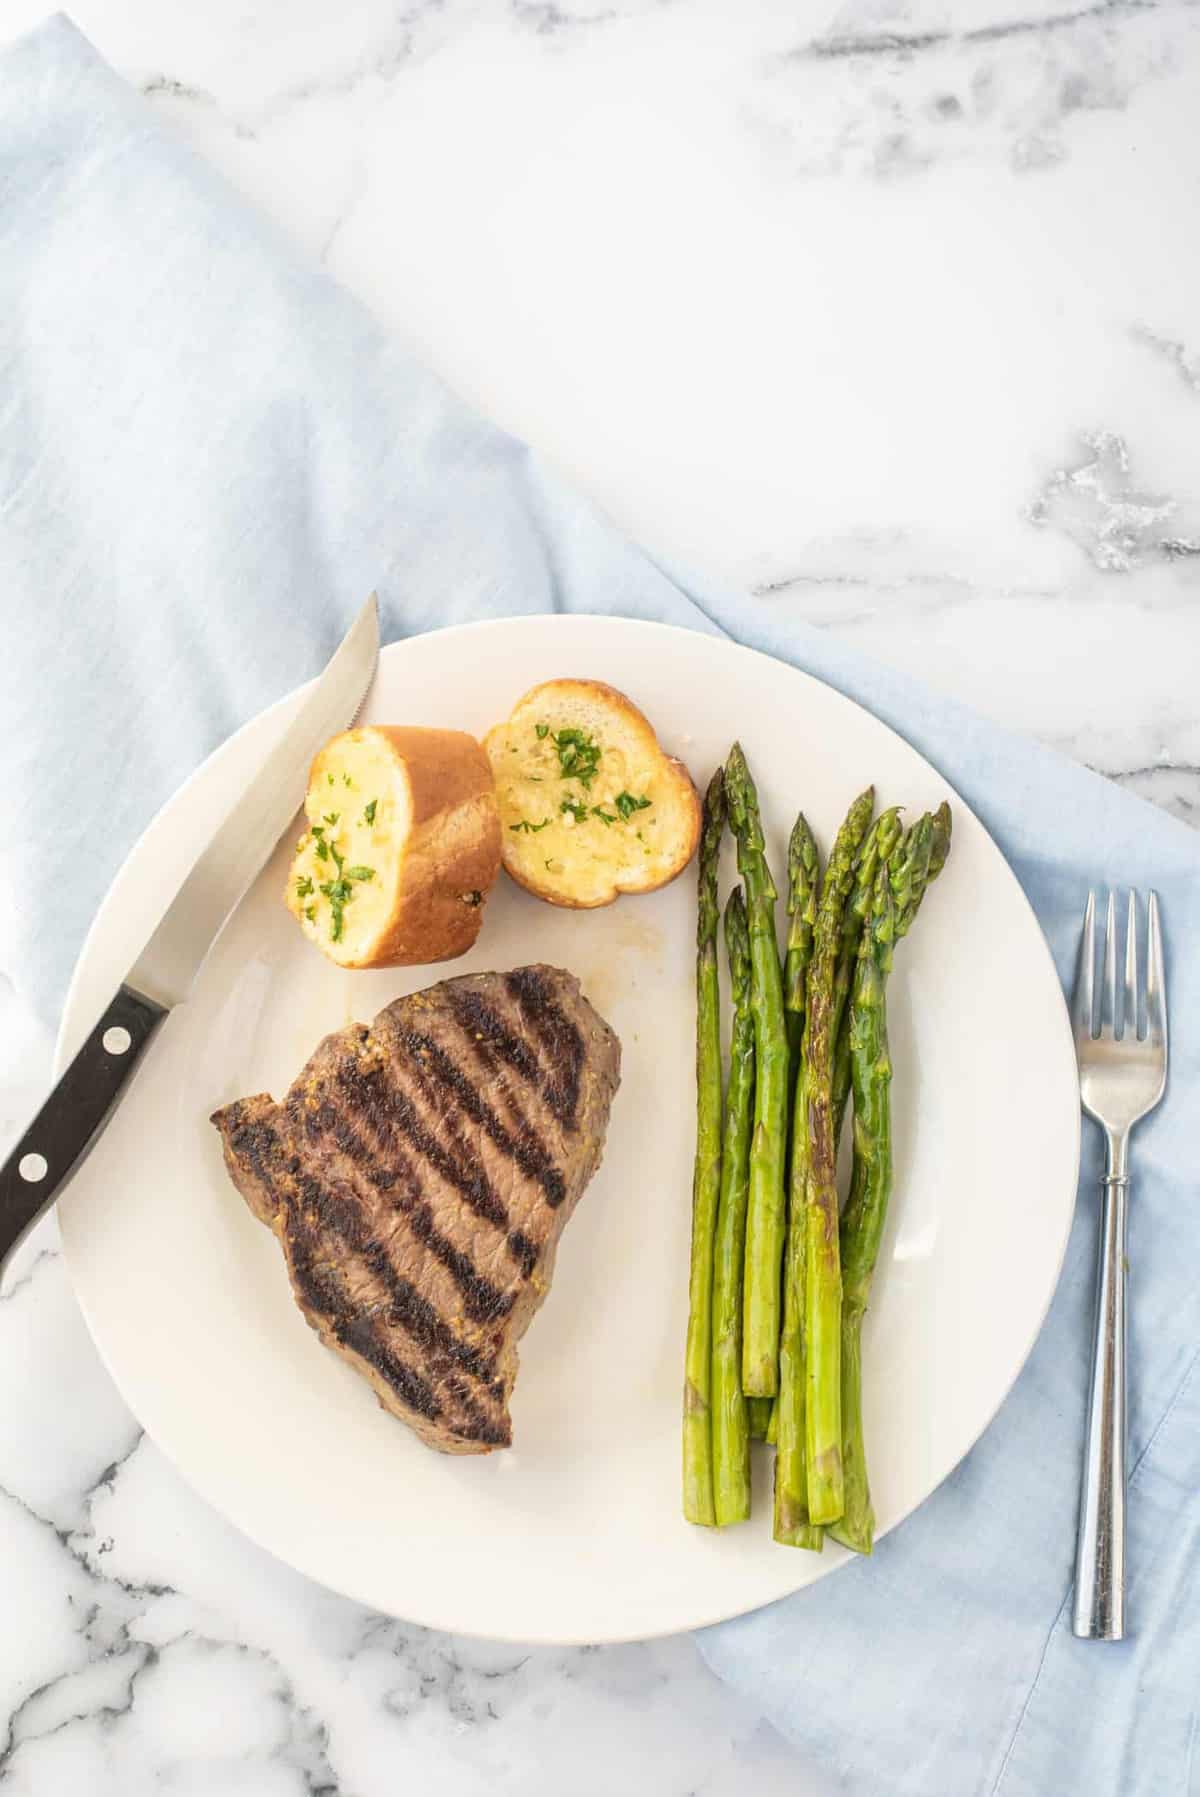 A grilled steak with a side of asparagus on a white plate.